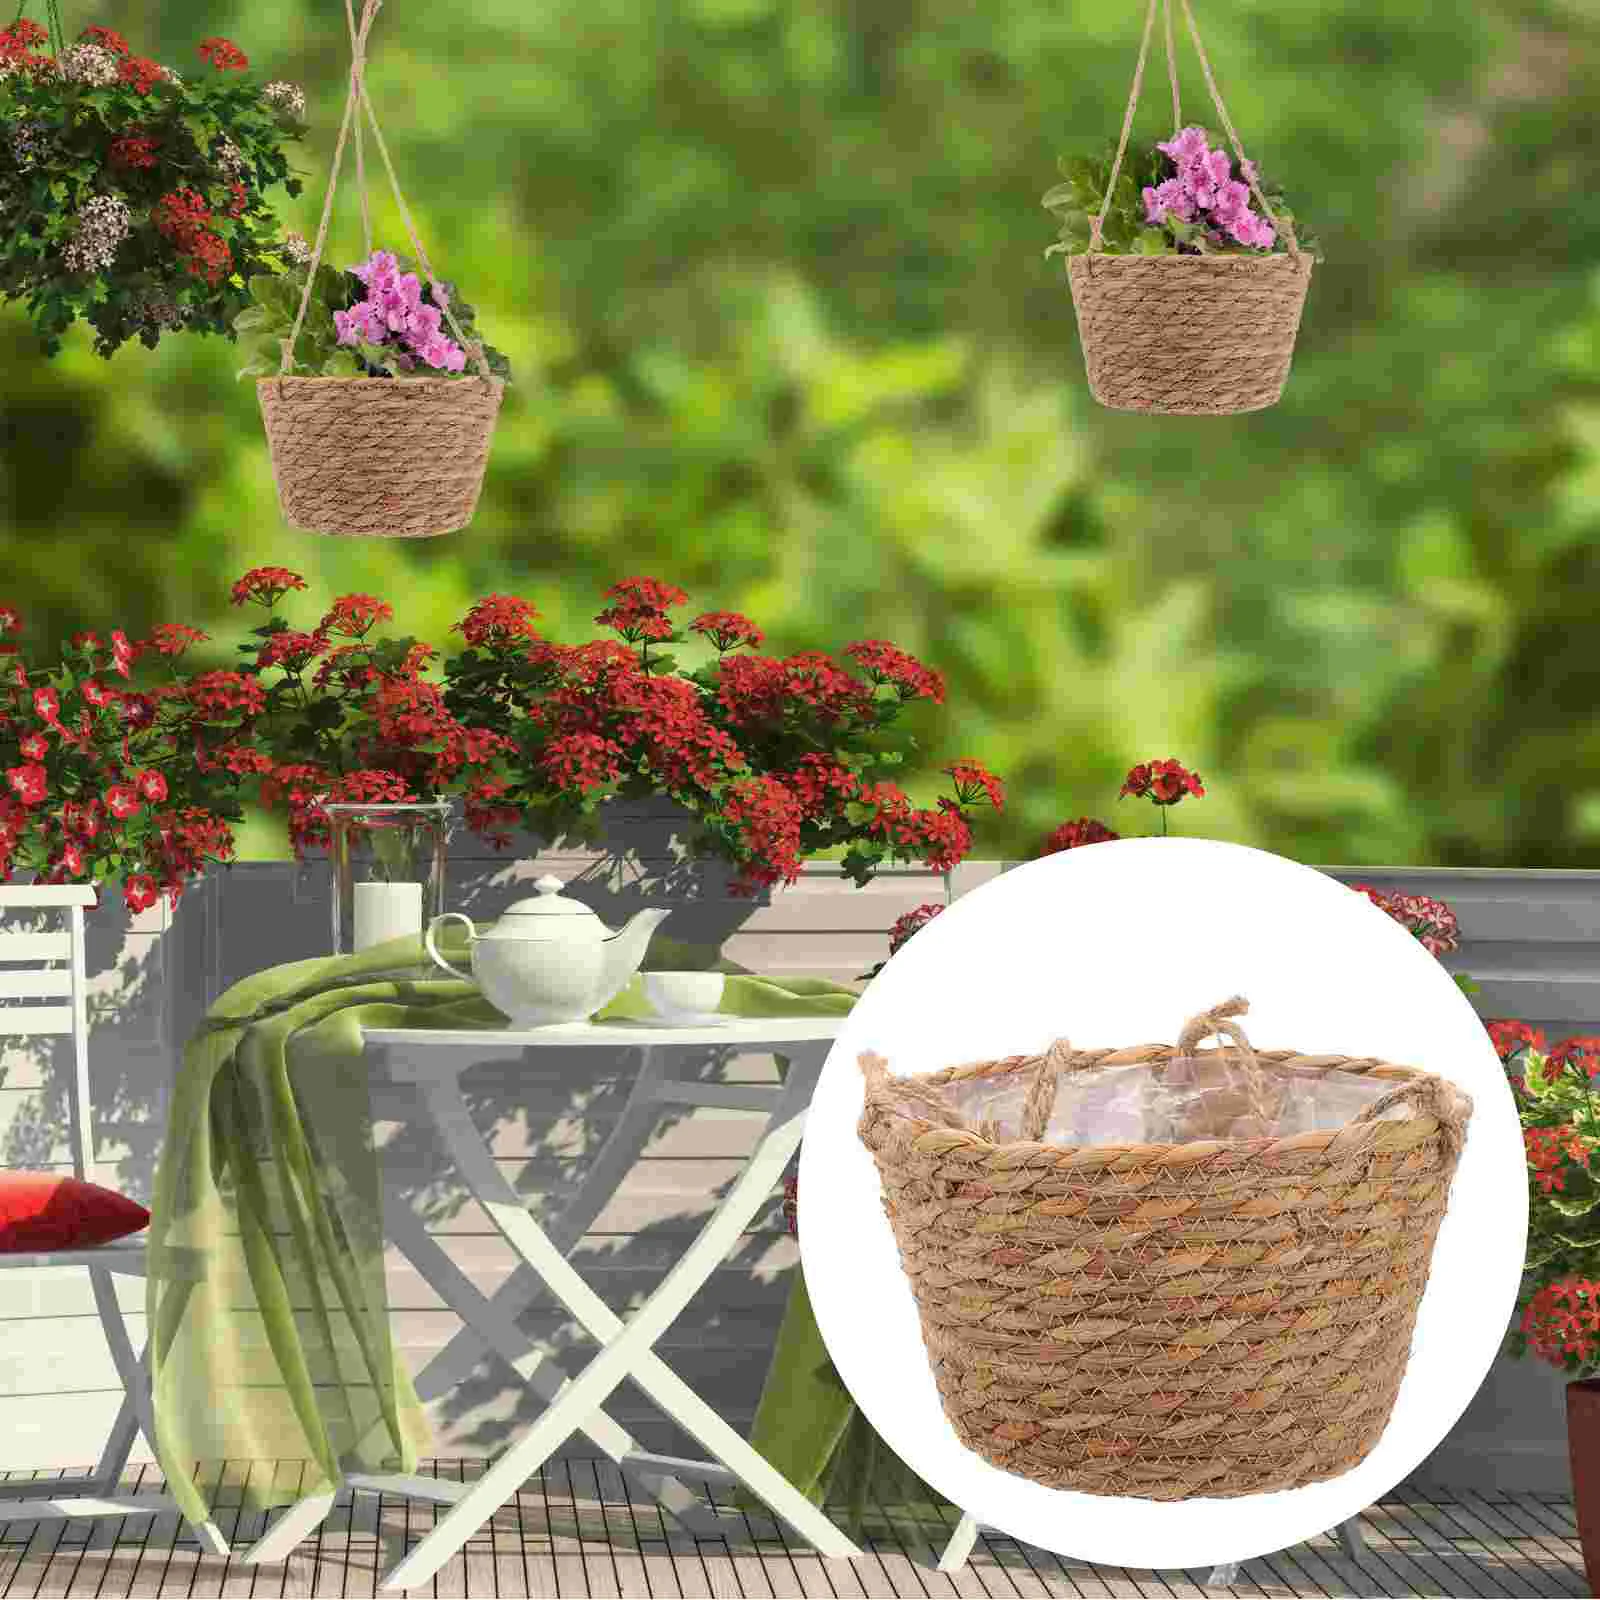 

Flower Pots Indoor Decorative Baskets Hanging Grower Country Style Straw Outdoor Plants